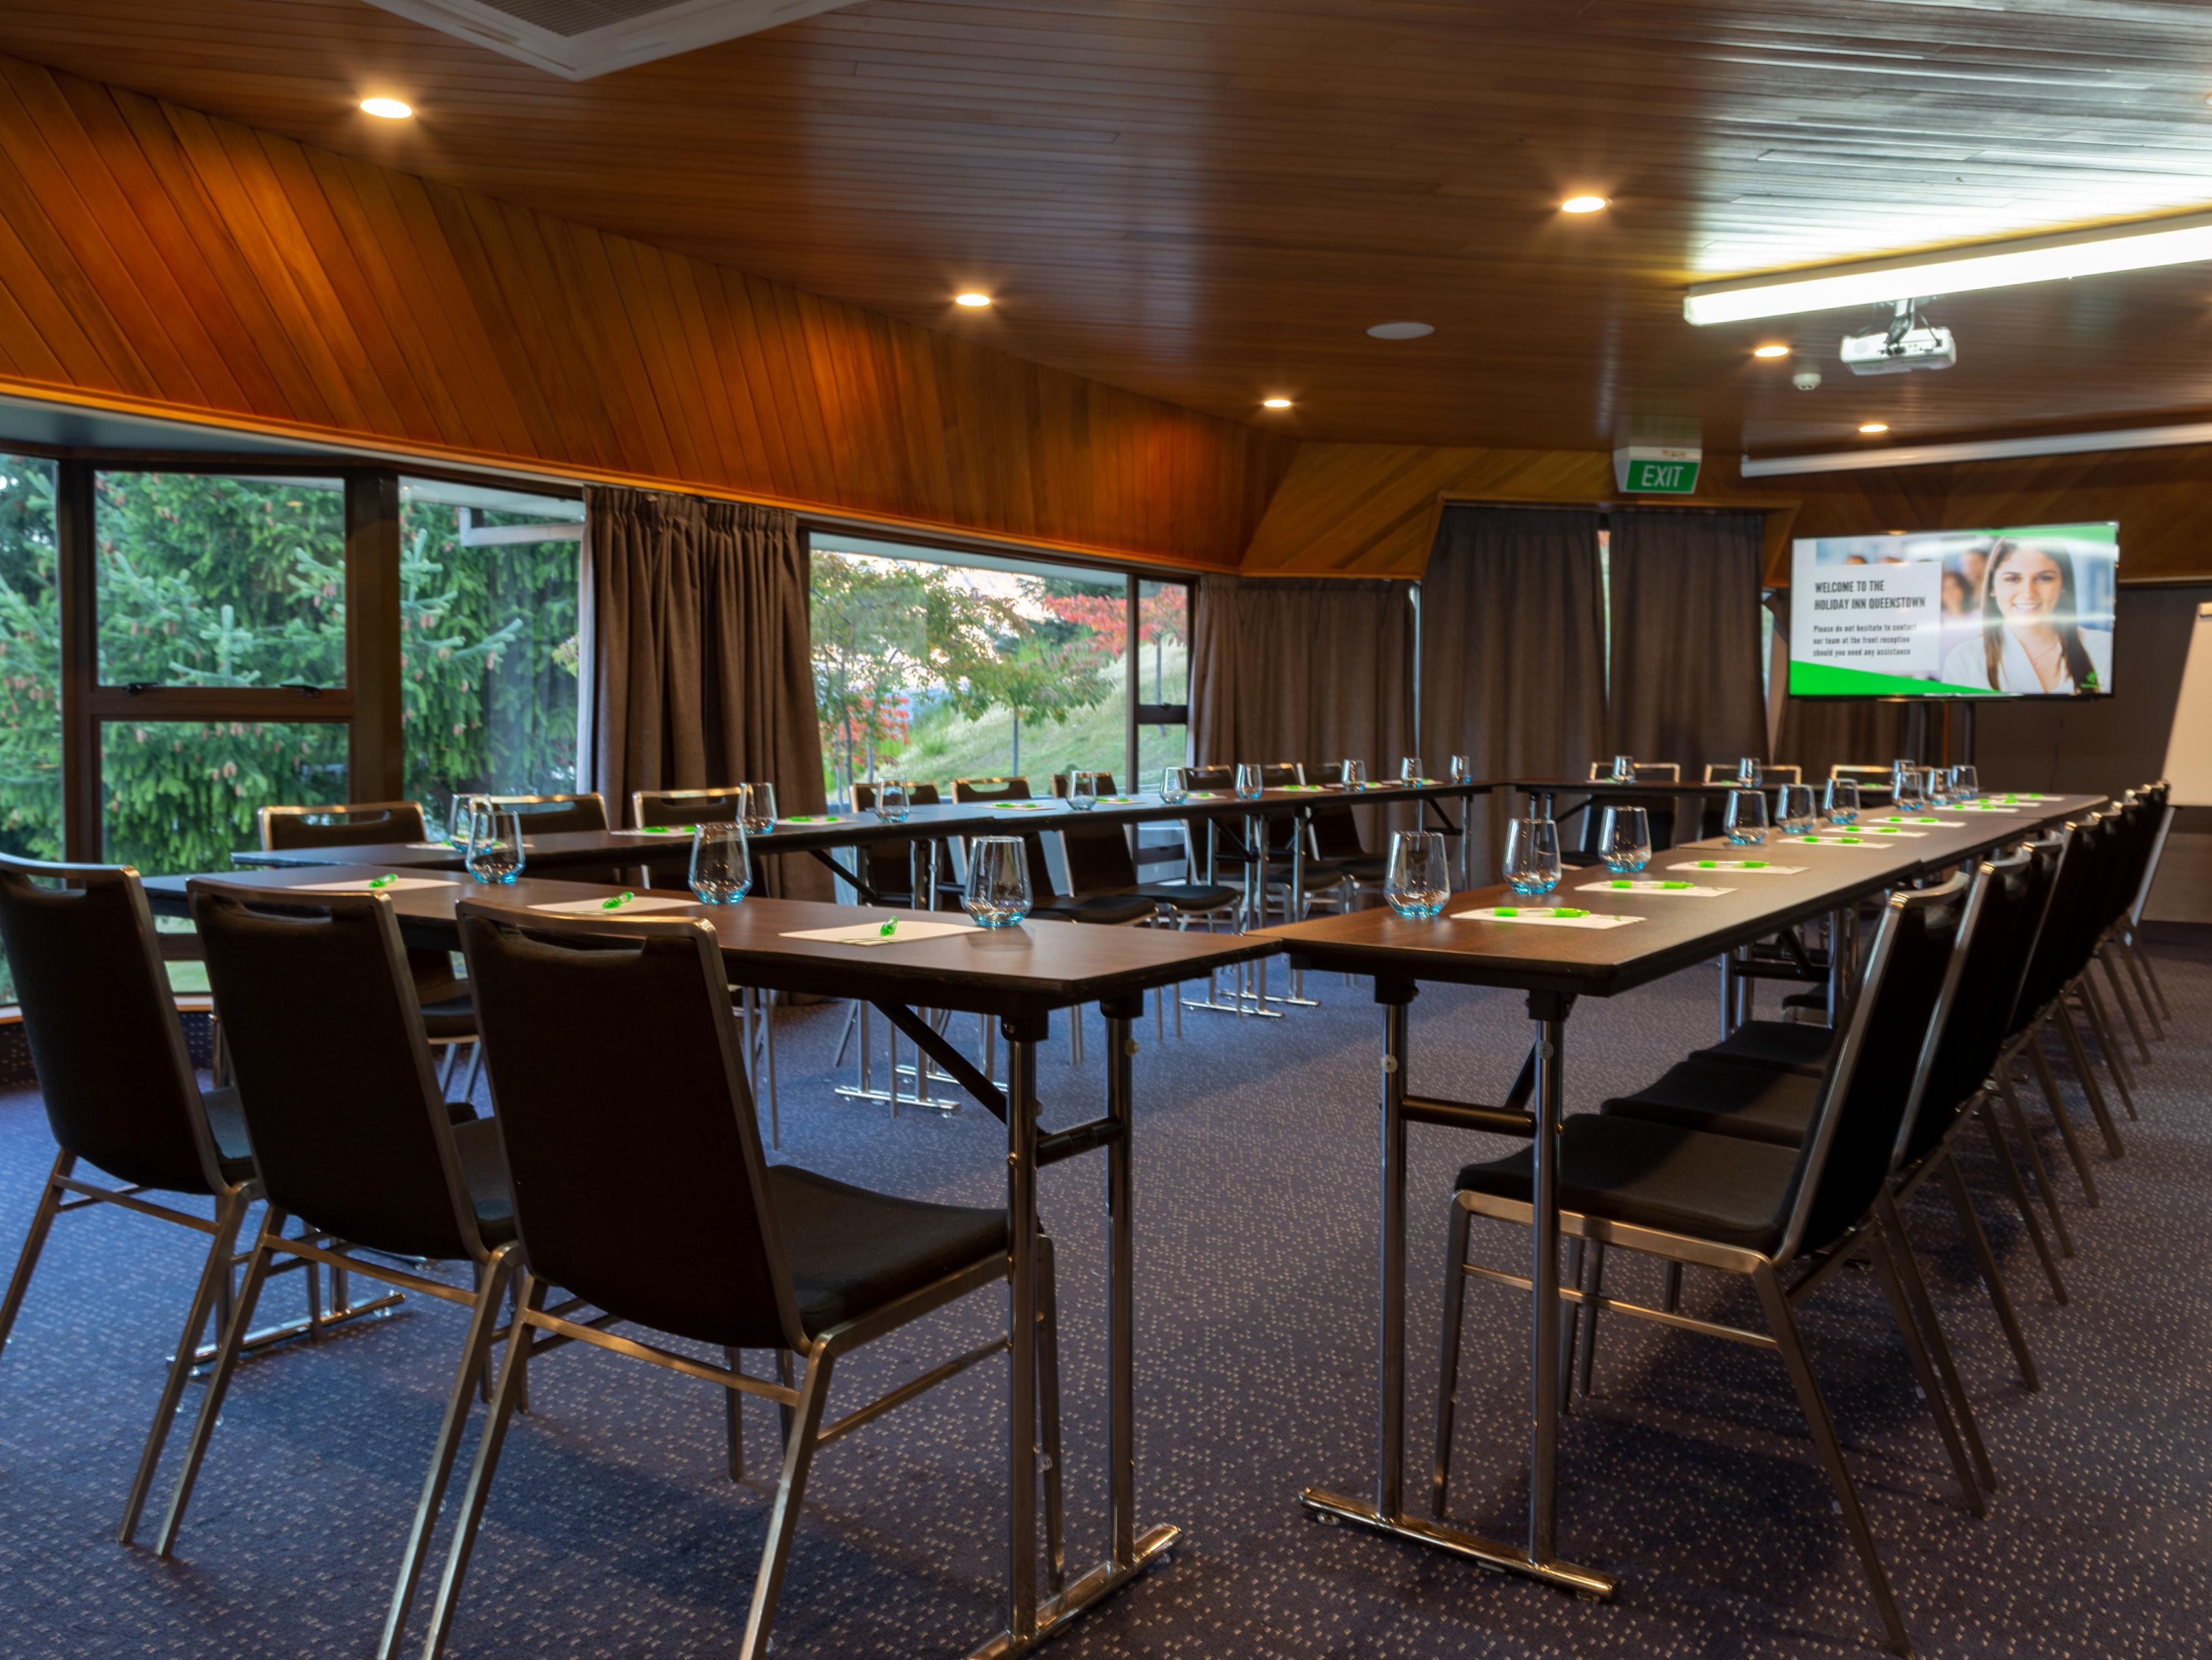 Host your events where innovation meets inspiration. Our premier meeting and events space boasts panoramic views of the enchanting Lake Wakatipu, elevating every gathering. Featuring AV tech, adaptable setups for various events, and top-notch catering from our in-house restaurant, this is truly a unique venue for your next Queenstown event.